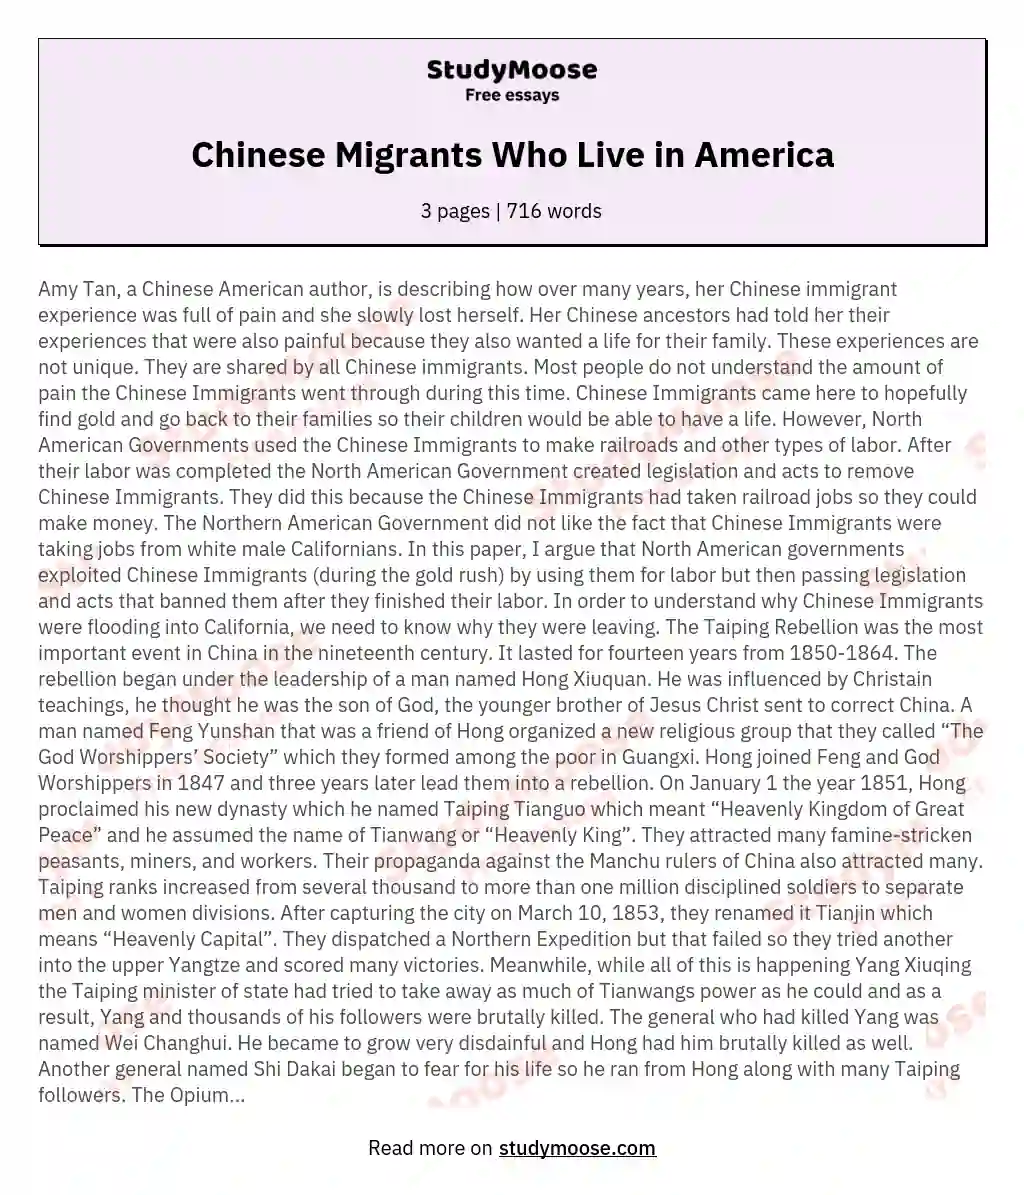 Chinese Migrants Who Live in America essay